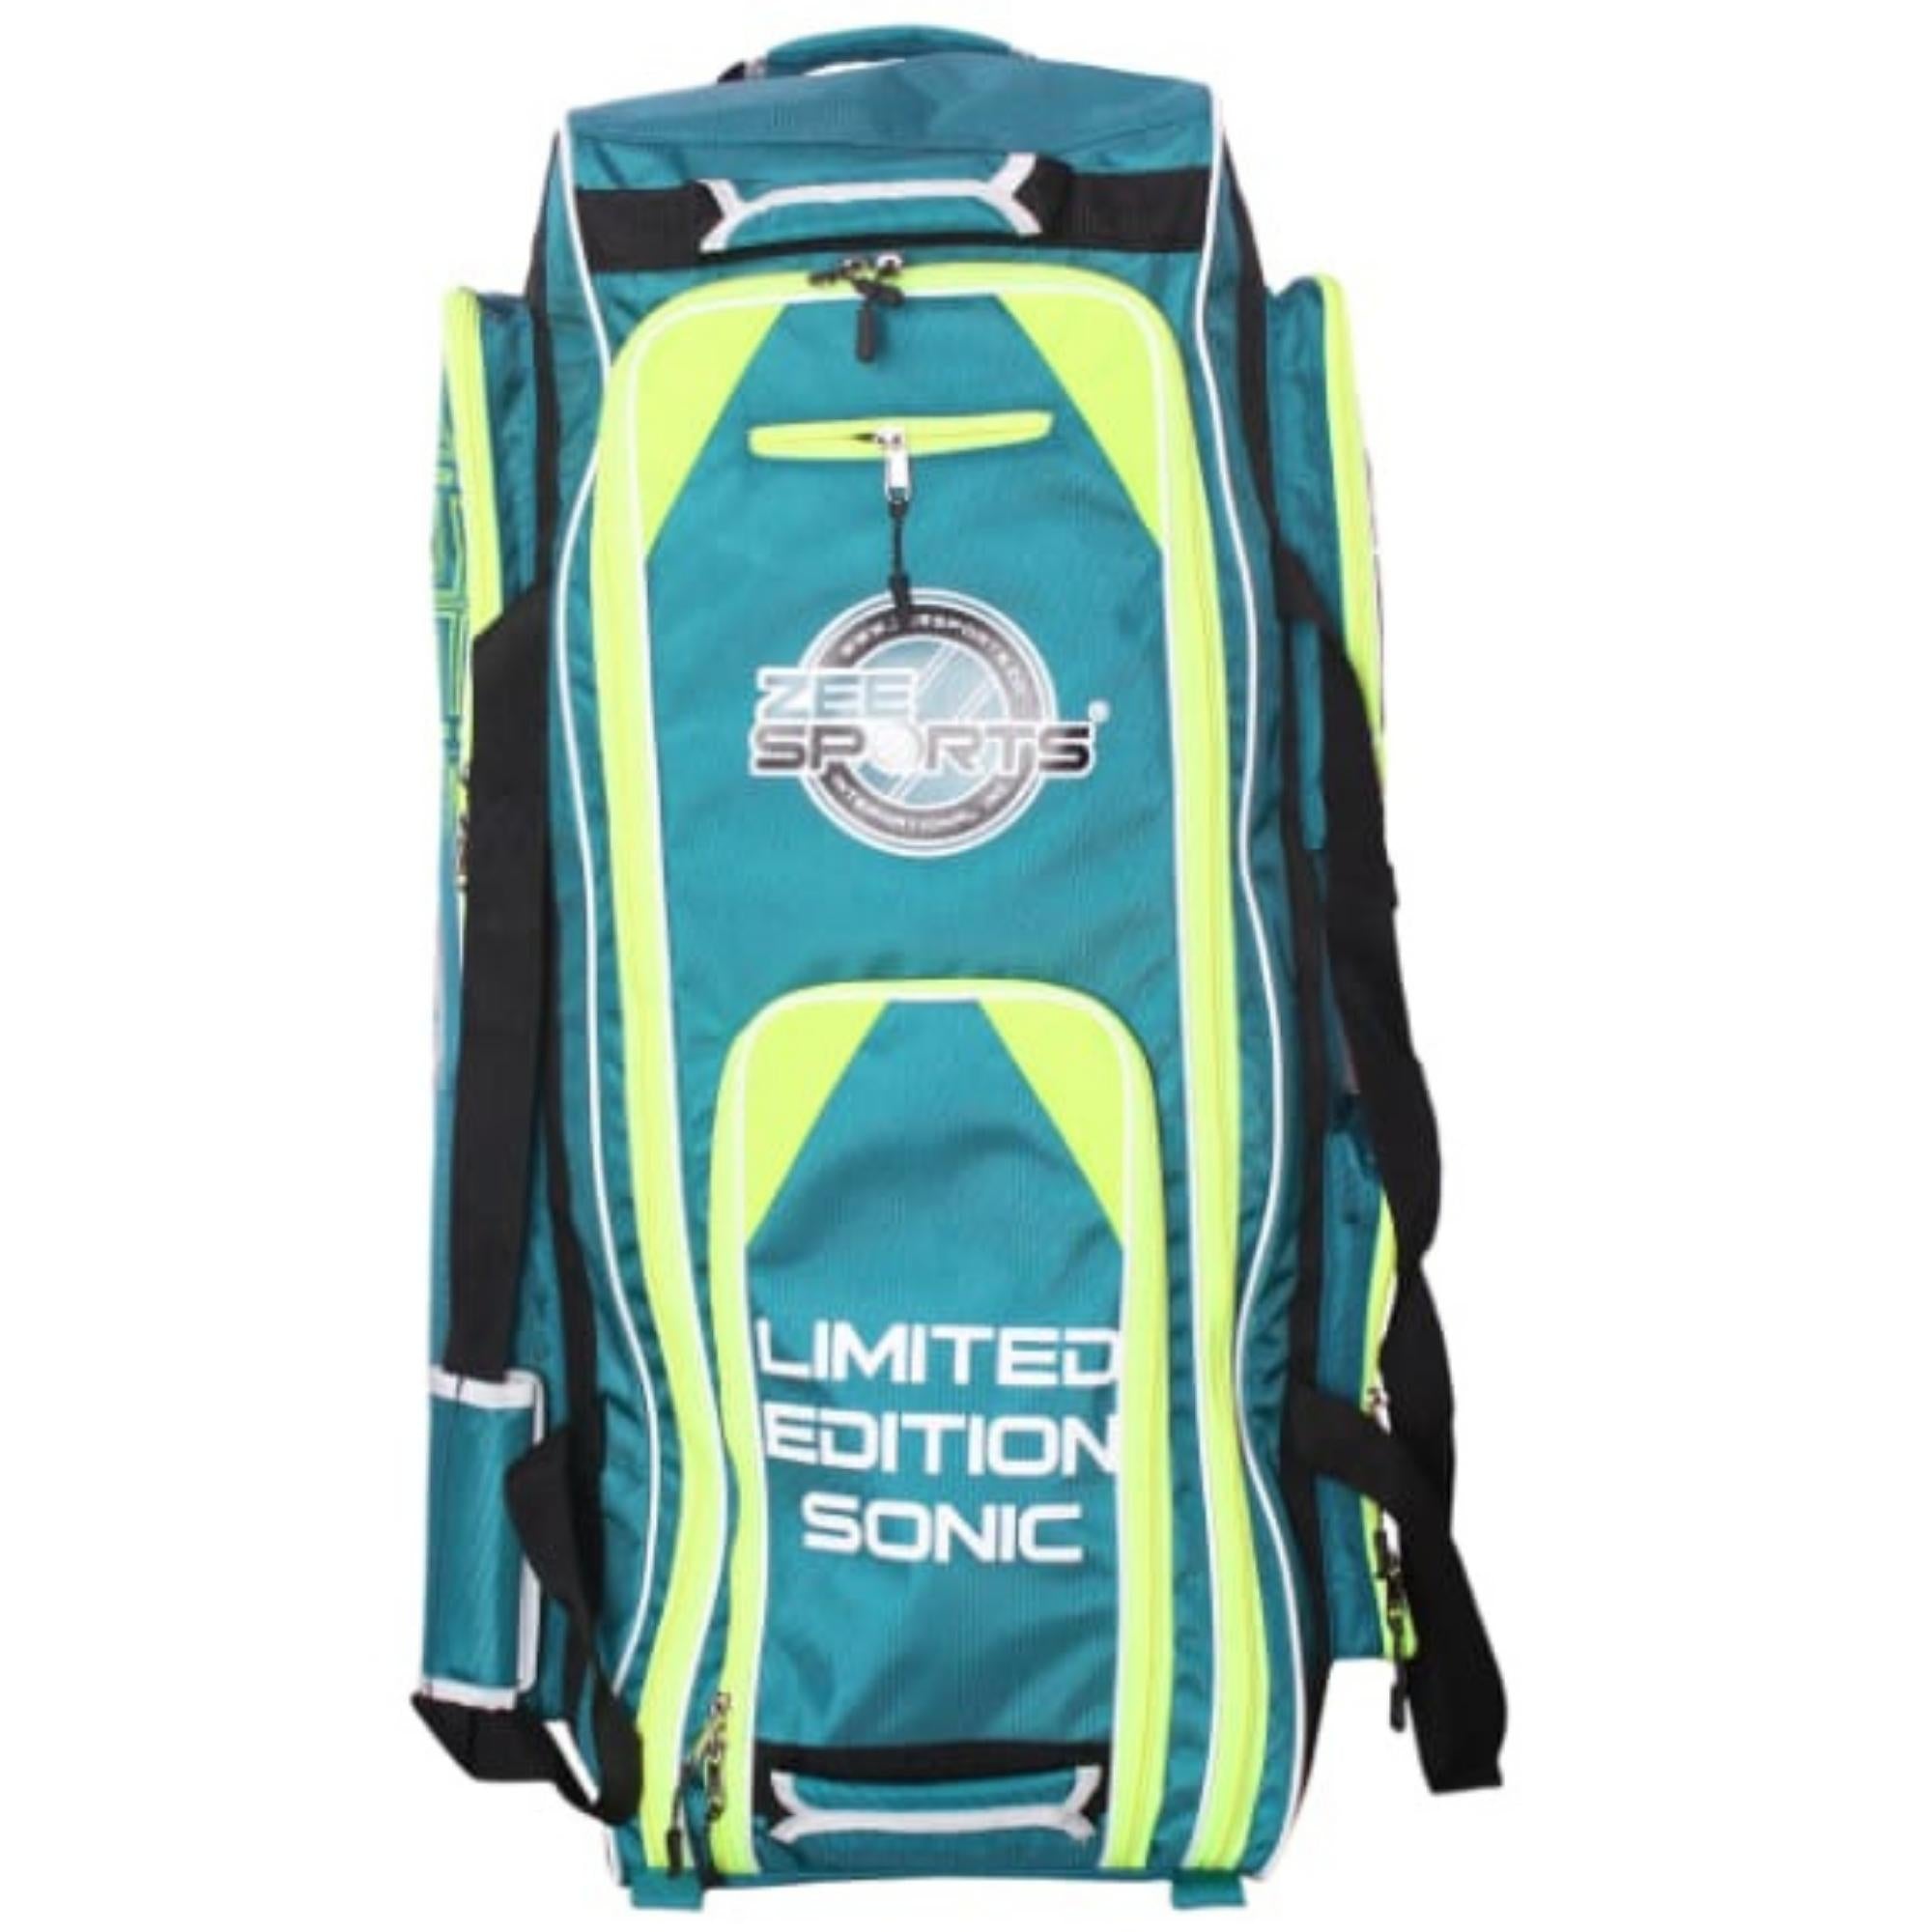 Zee Sports Kit Bag Limited Edition Sonic Green with Lime